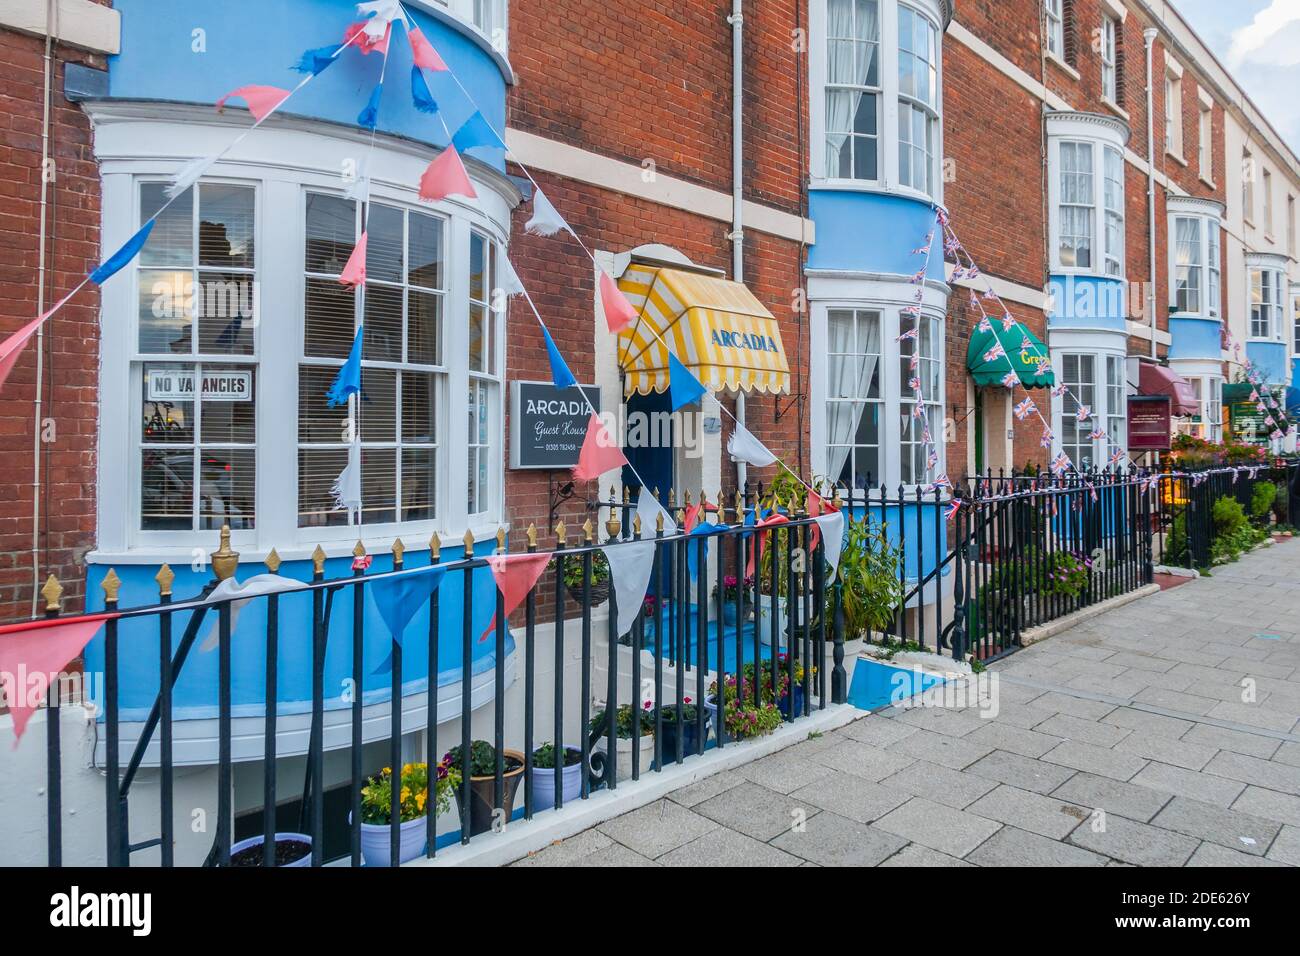 WEYMOUTH, UK - 28TH AUG 2020: The outside of a guest house in Weymouth in Dorset, England. Stock Photo